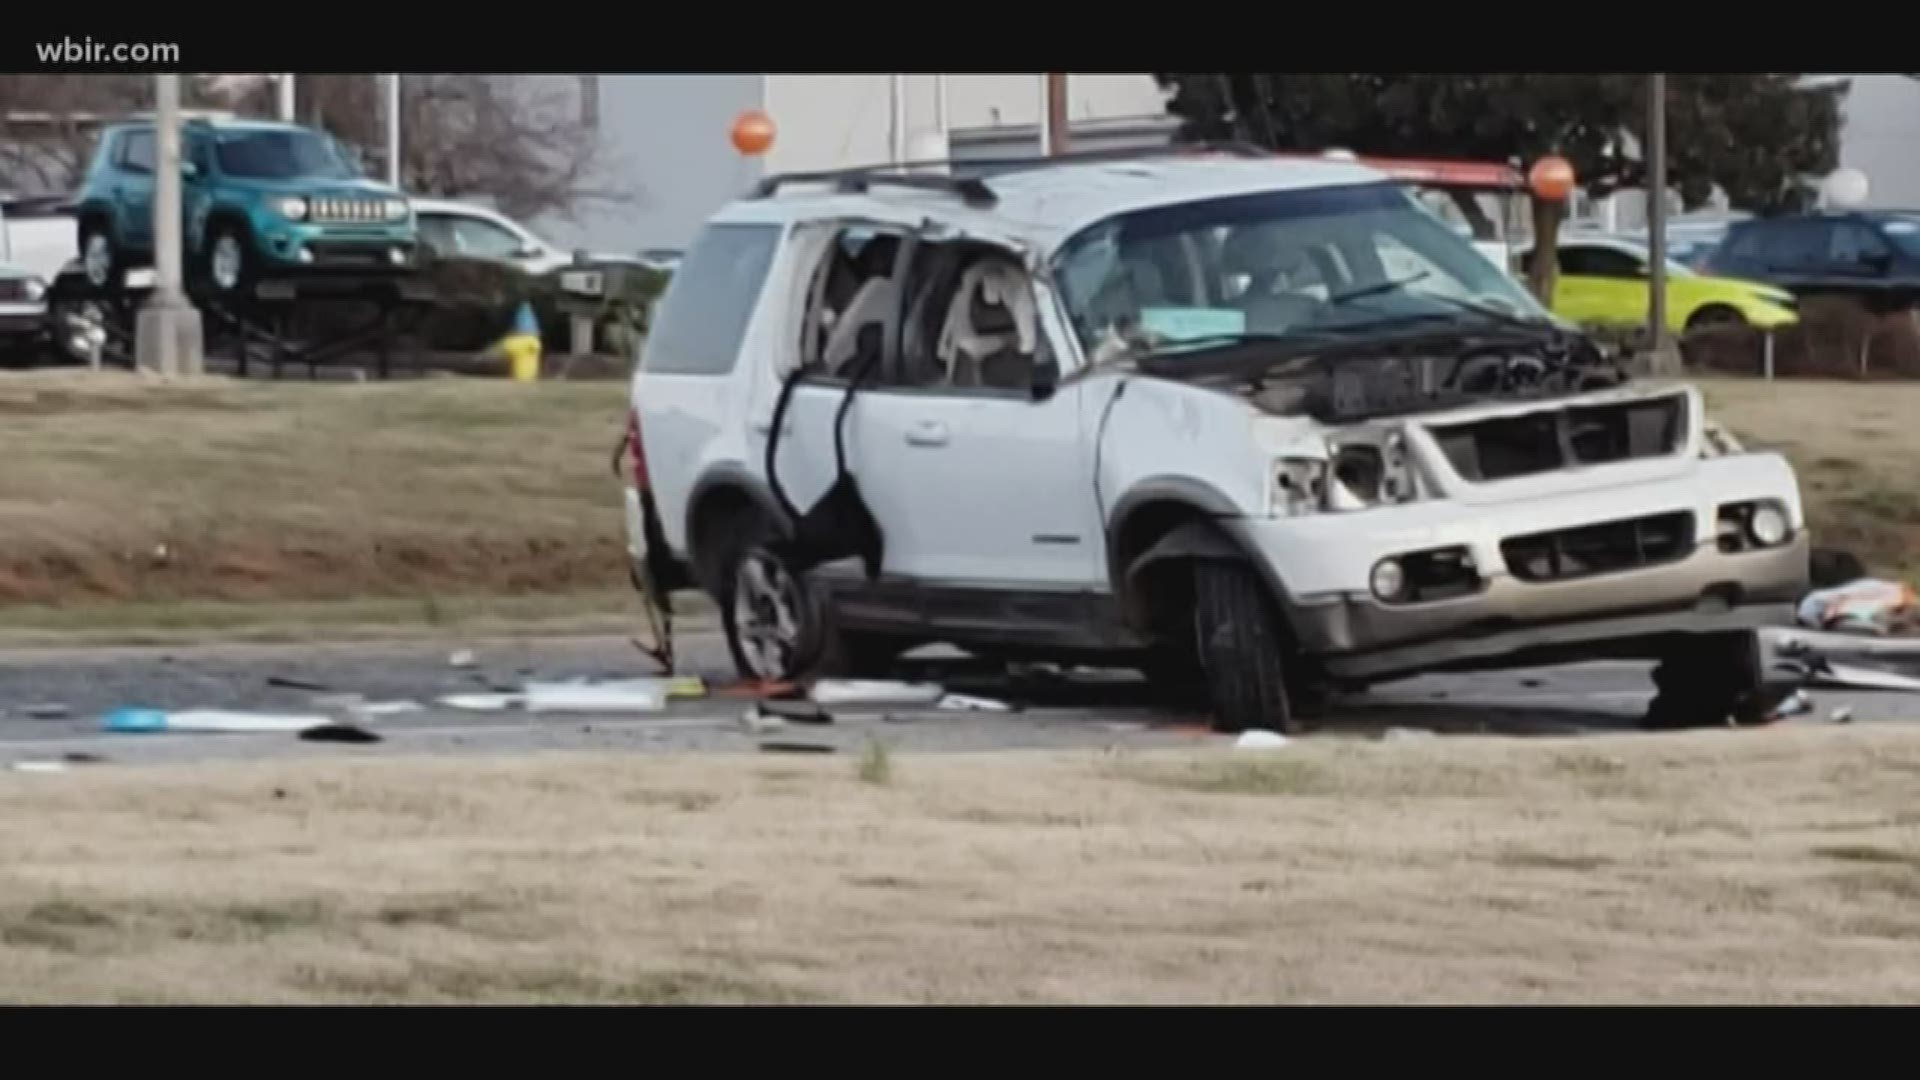 The Alcoa Police Department has identified those involved in the crash at Alcoa Highway at Buick Drive Saturday morning.